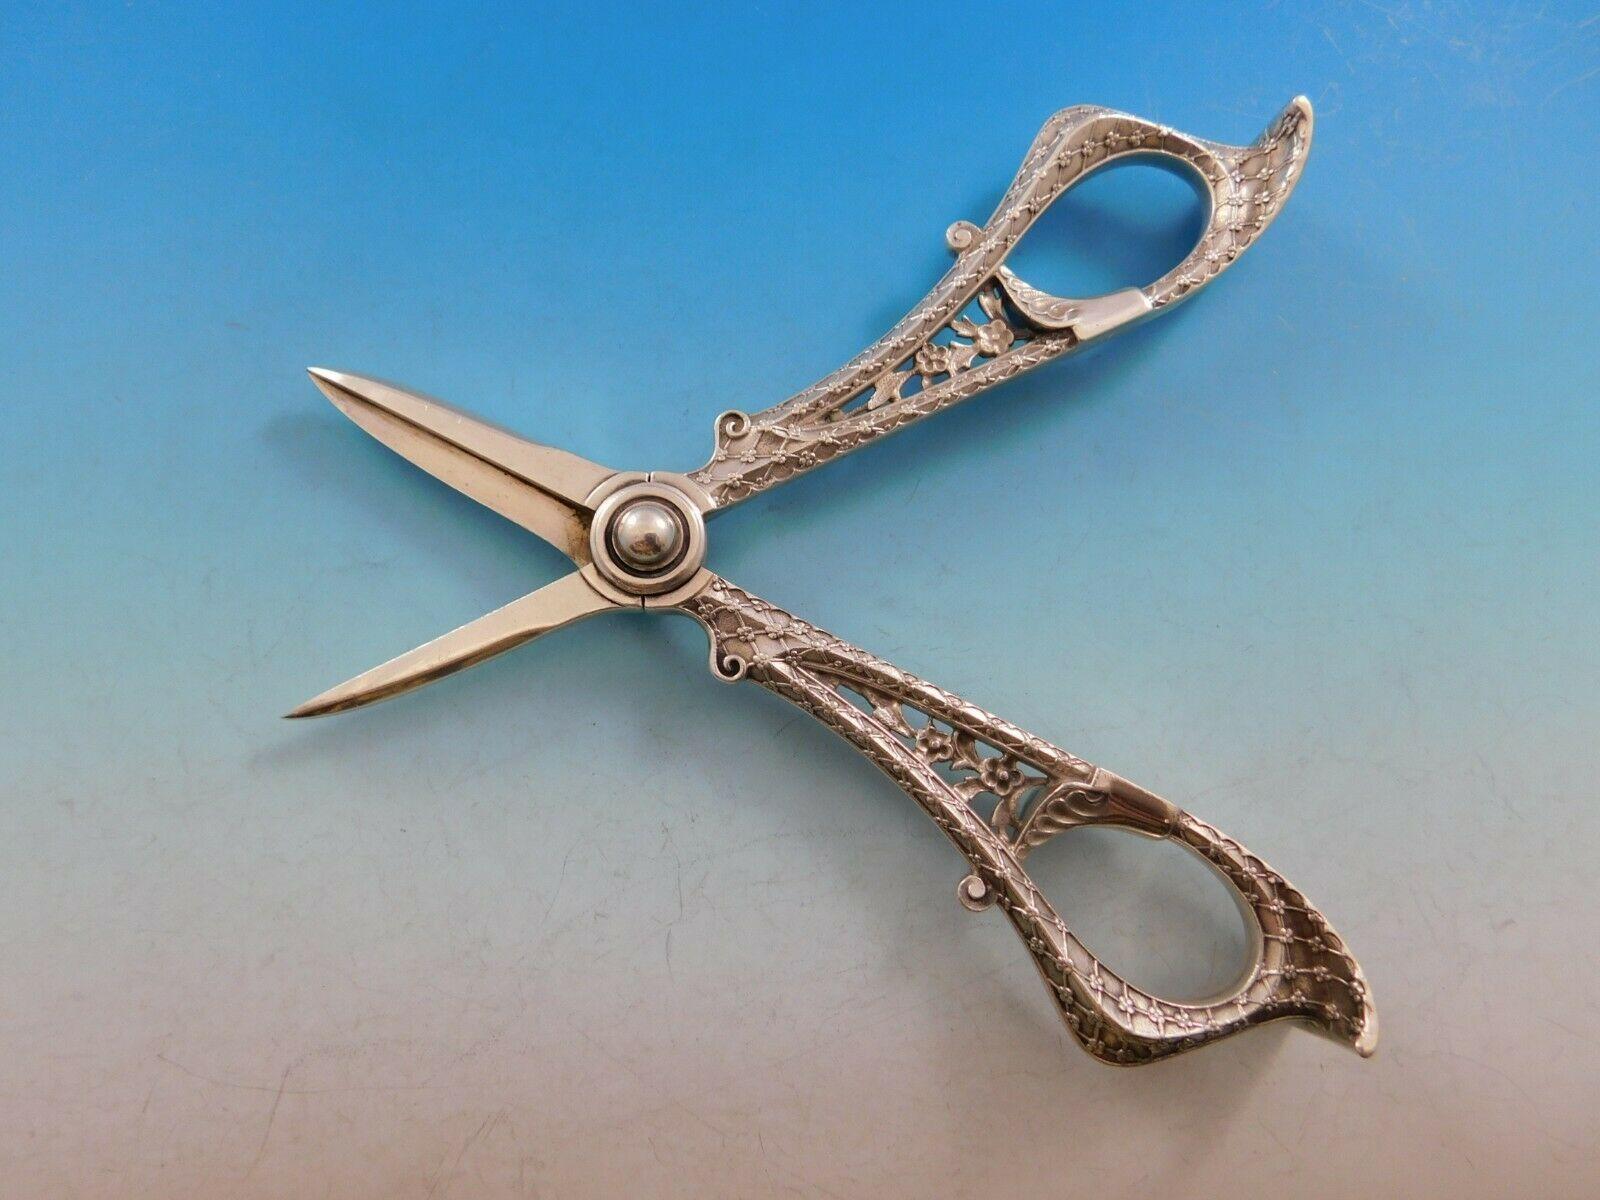 Persian originated in 1872 when exotic lands were in vogue (Japanese, Egyptian, Persian). It is absolutely striking with its intricate design. It is a beautiful example of the silver makers art.

Stunning sterling silver Grape Shears measuring 6